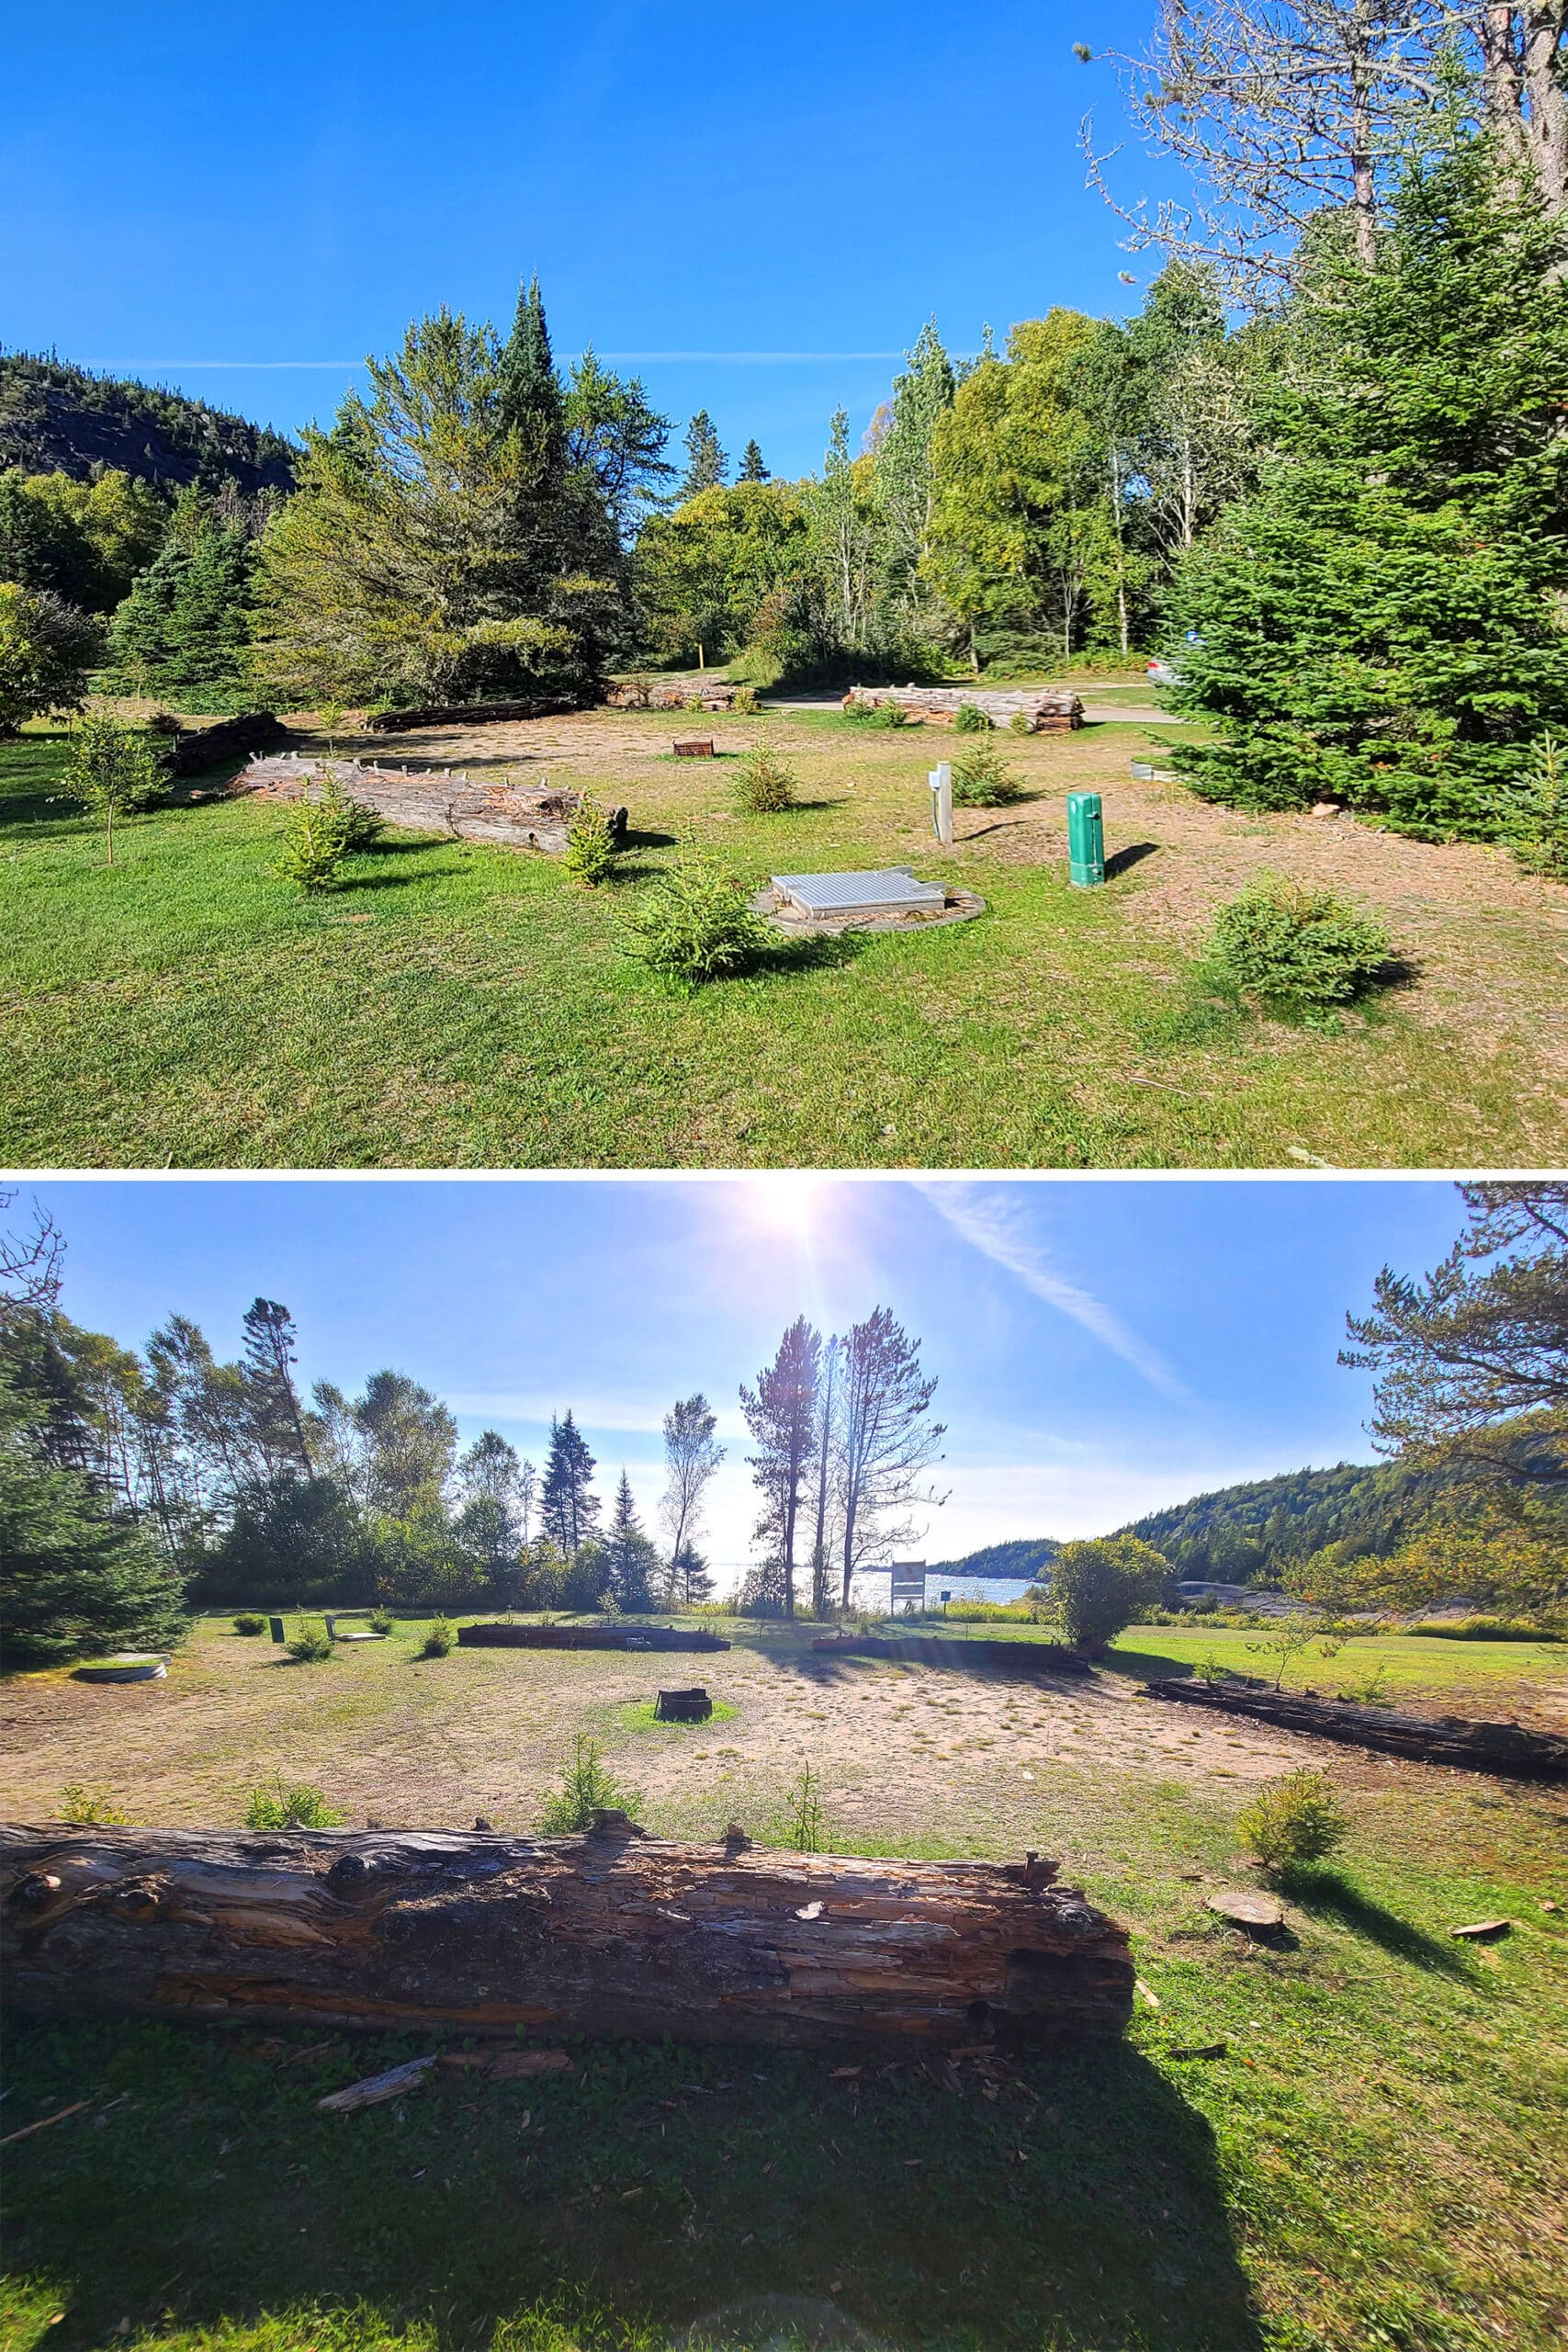 A 2 part image showing different views of a clearing that's bordered with logs and has a fire pit in the middle.